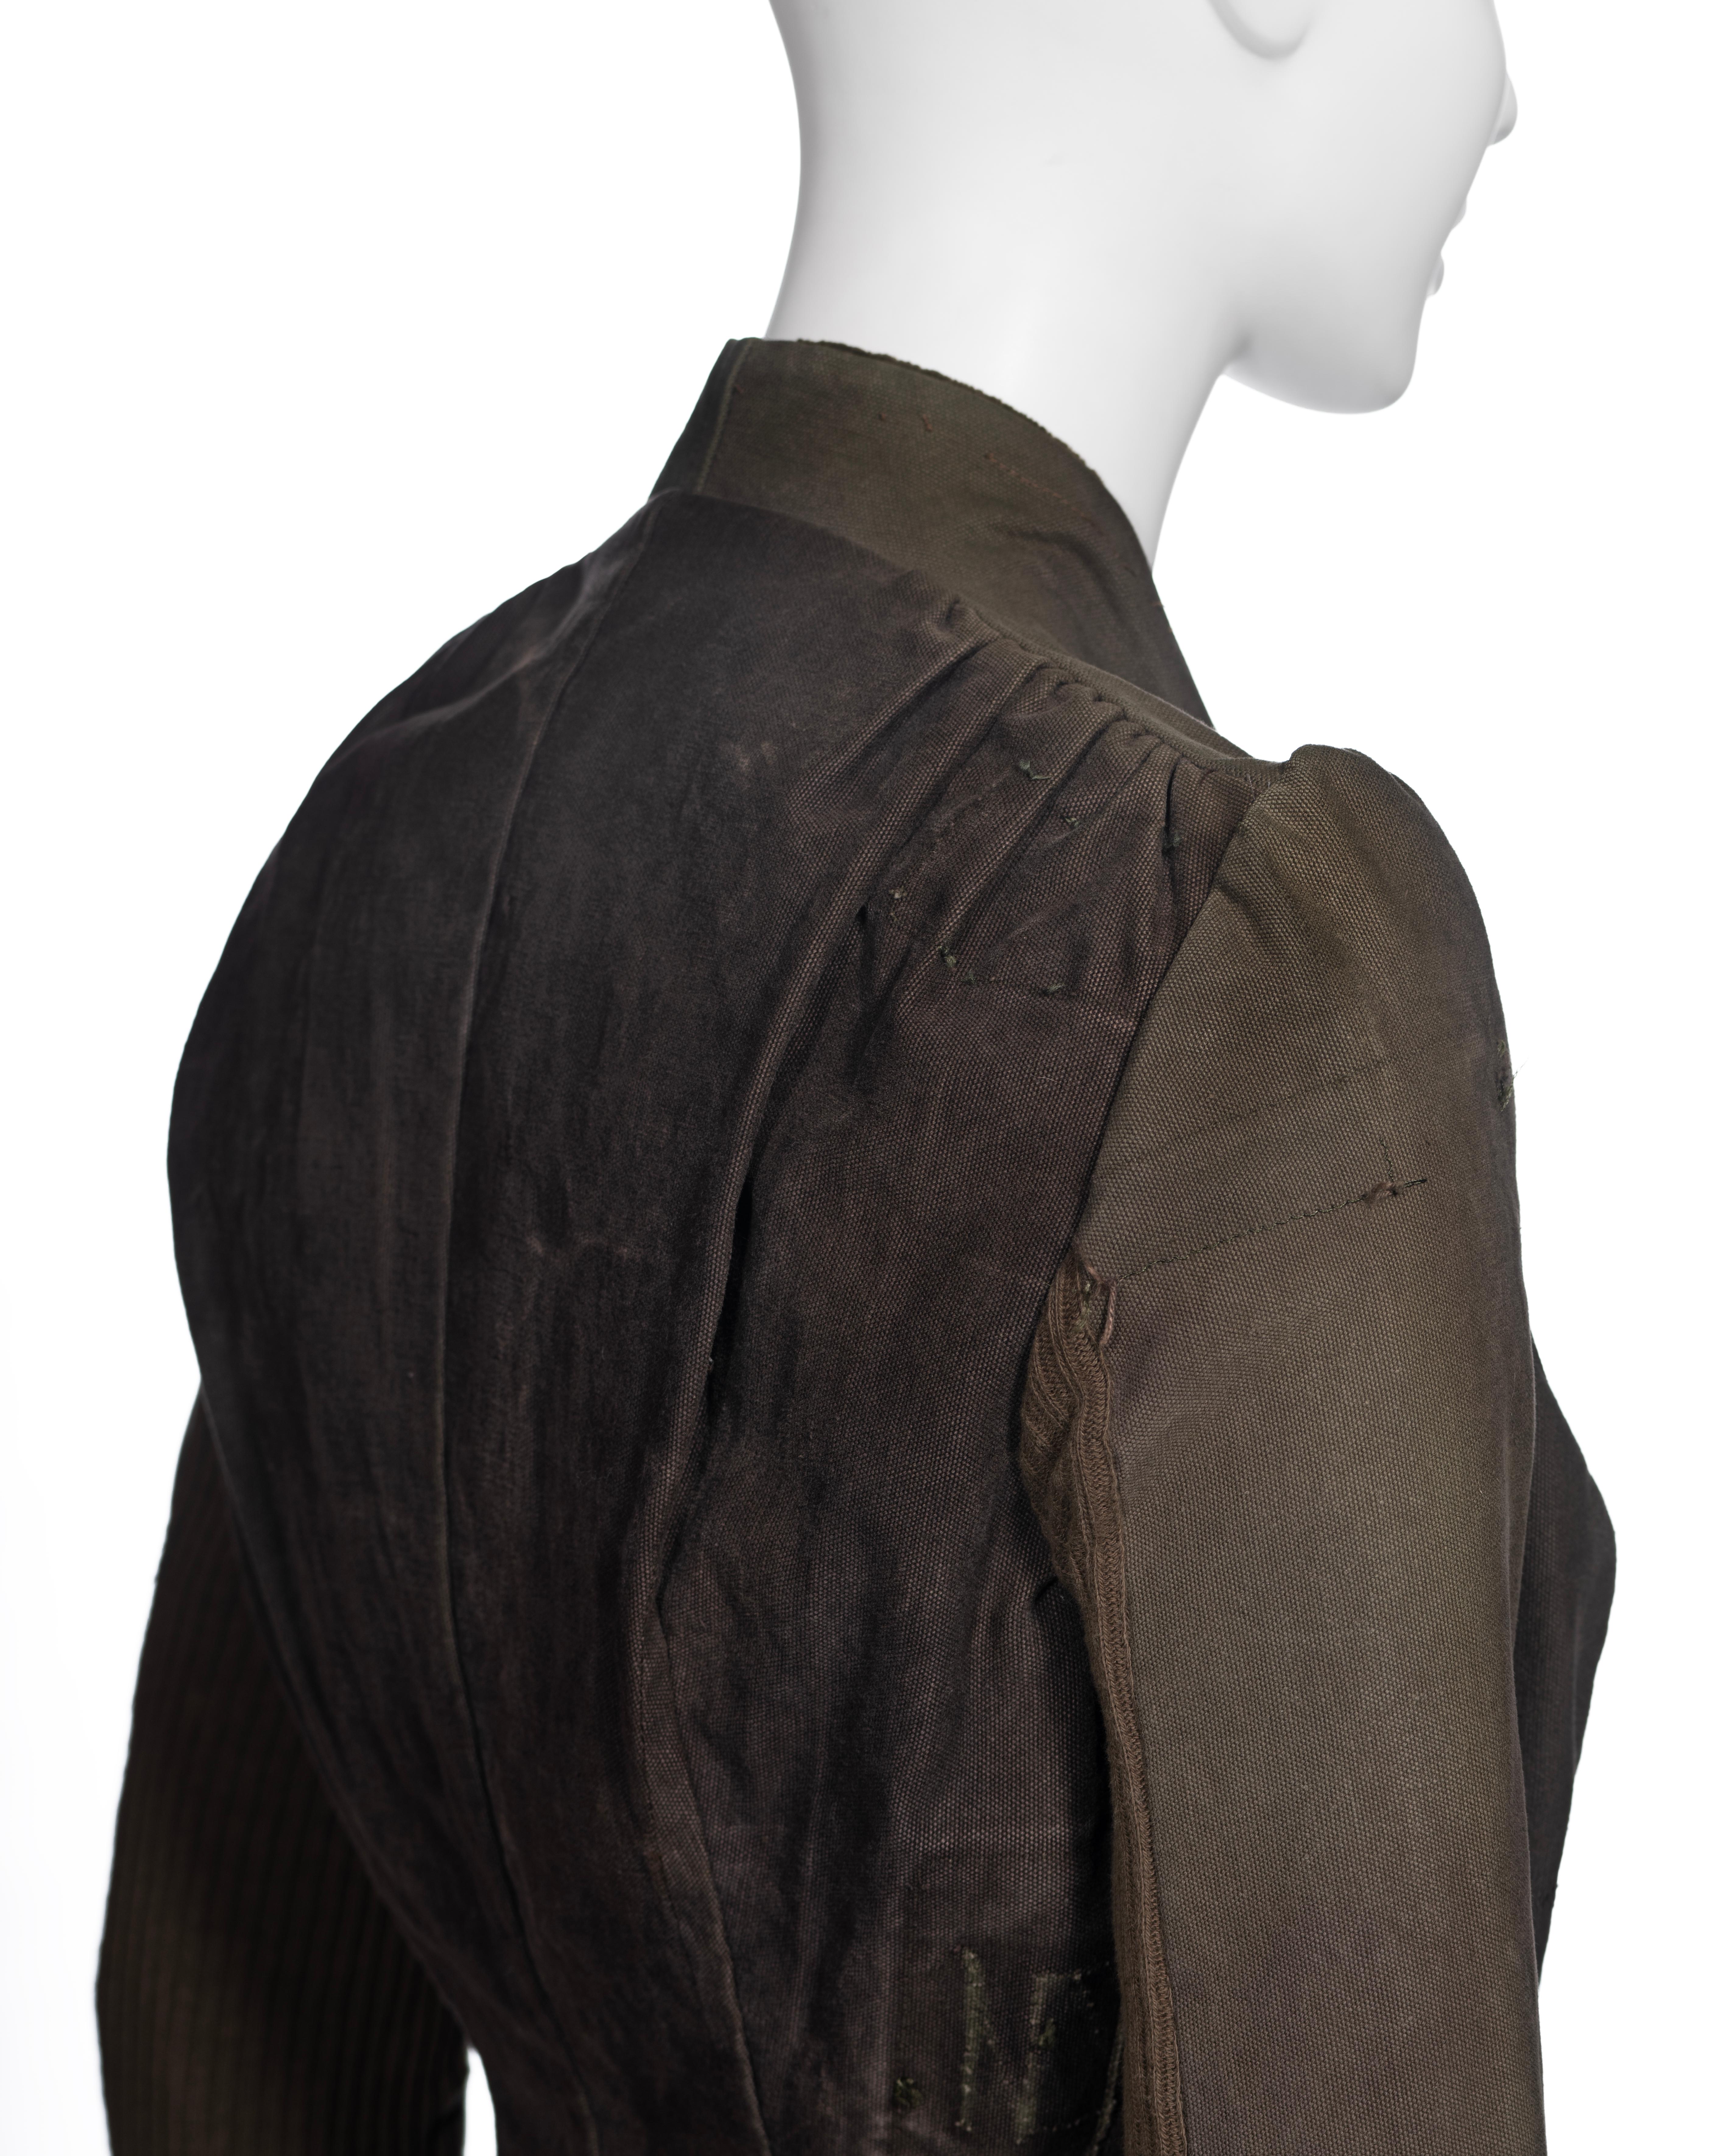 Rick Owens Jacket Made From Deconstructed Military Surplus Bags, c. 1998 7